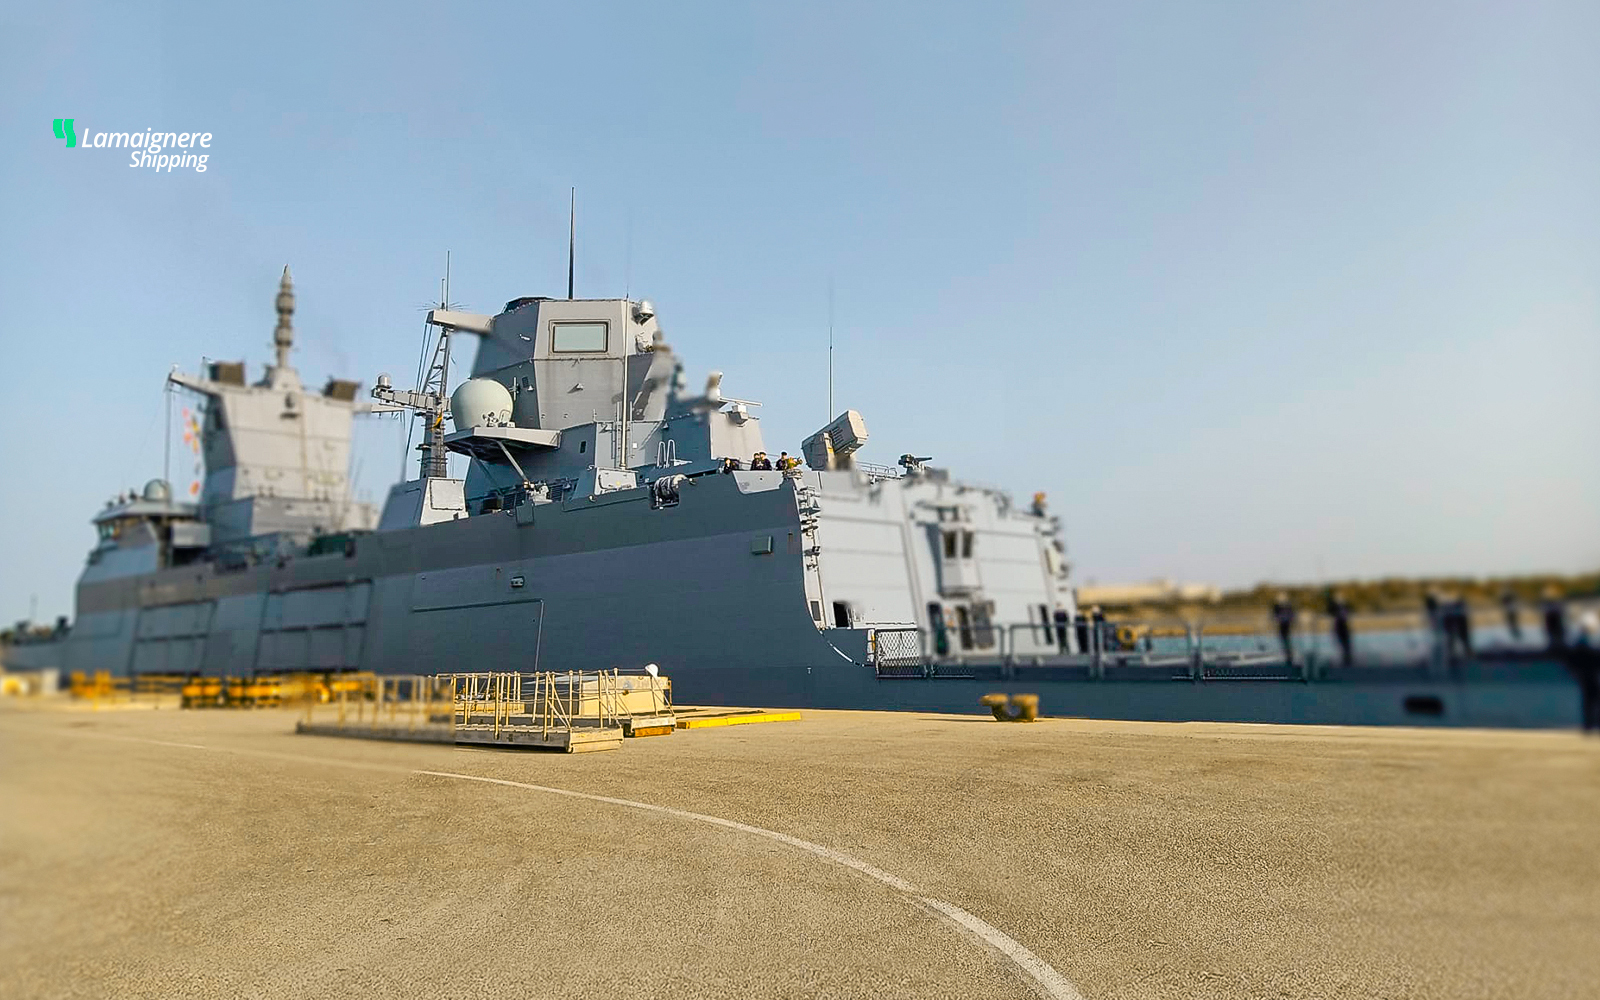 Lamaignere provides shipping agency services to a German military ship from January 28 to 31 at the Rota Naval Base